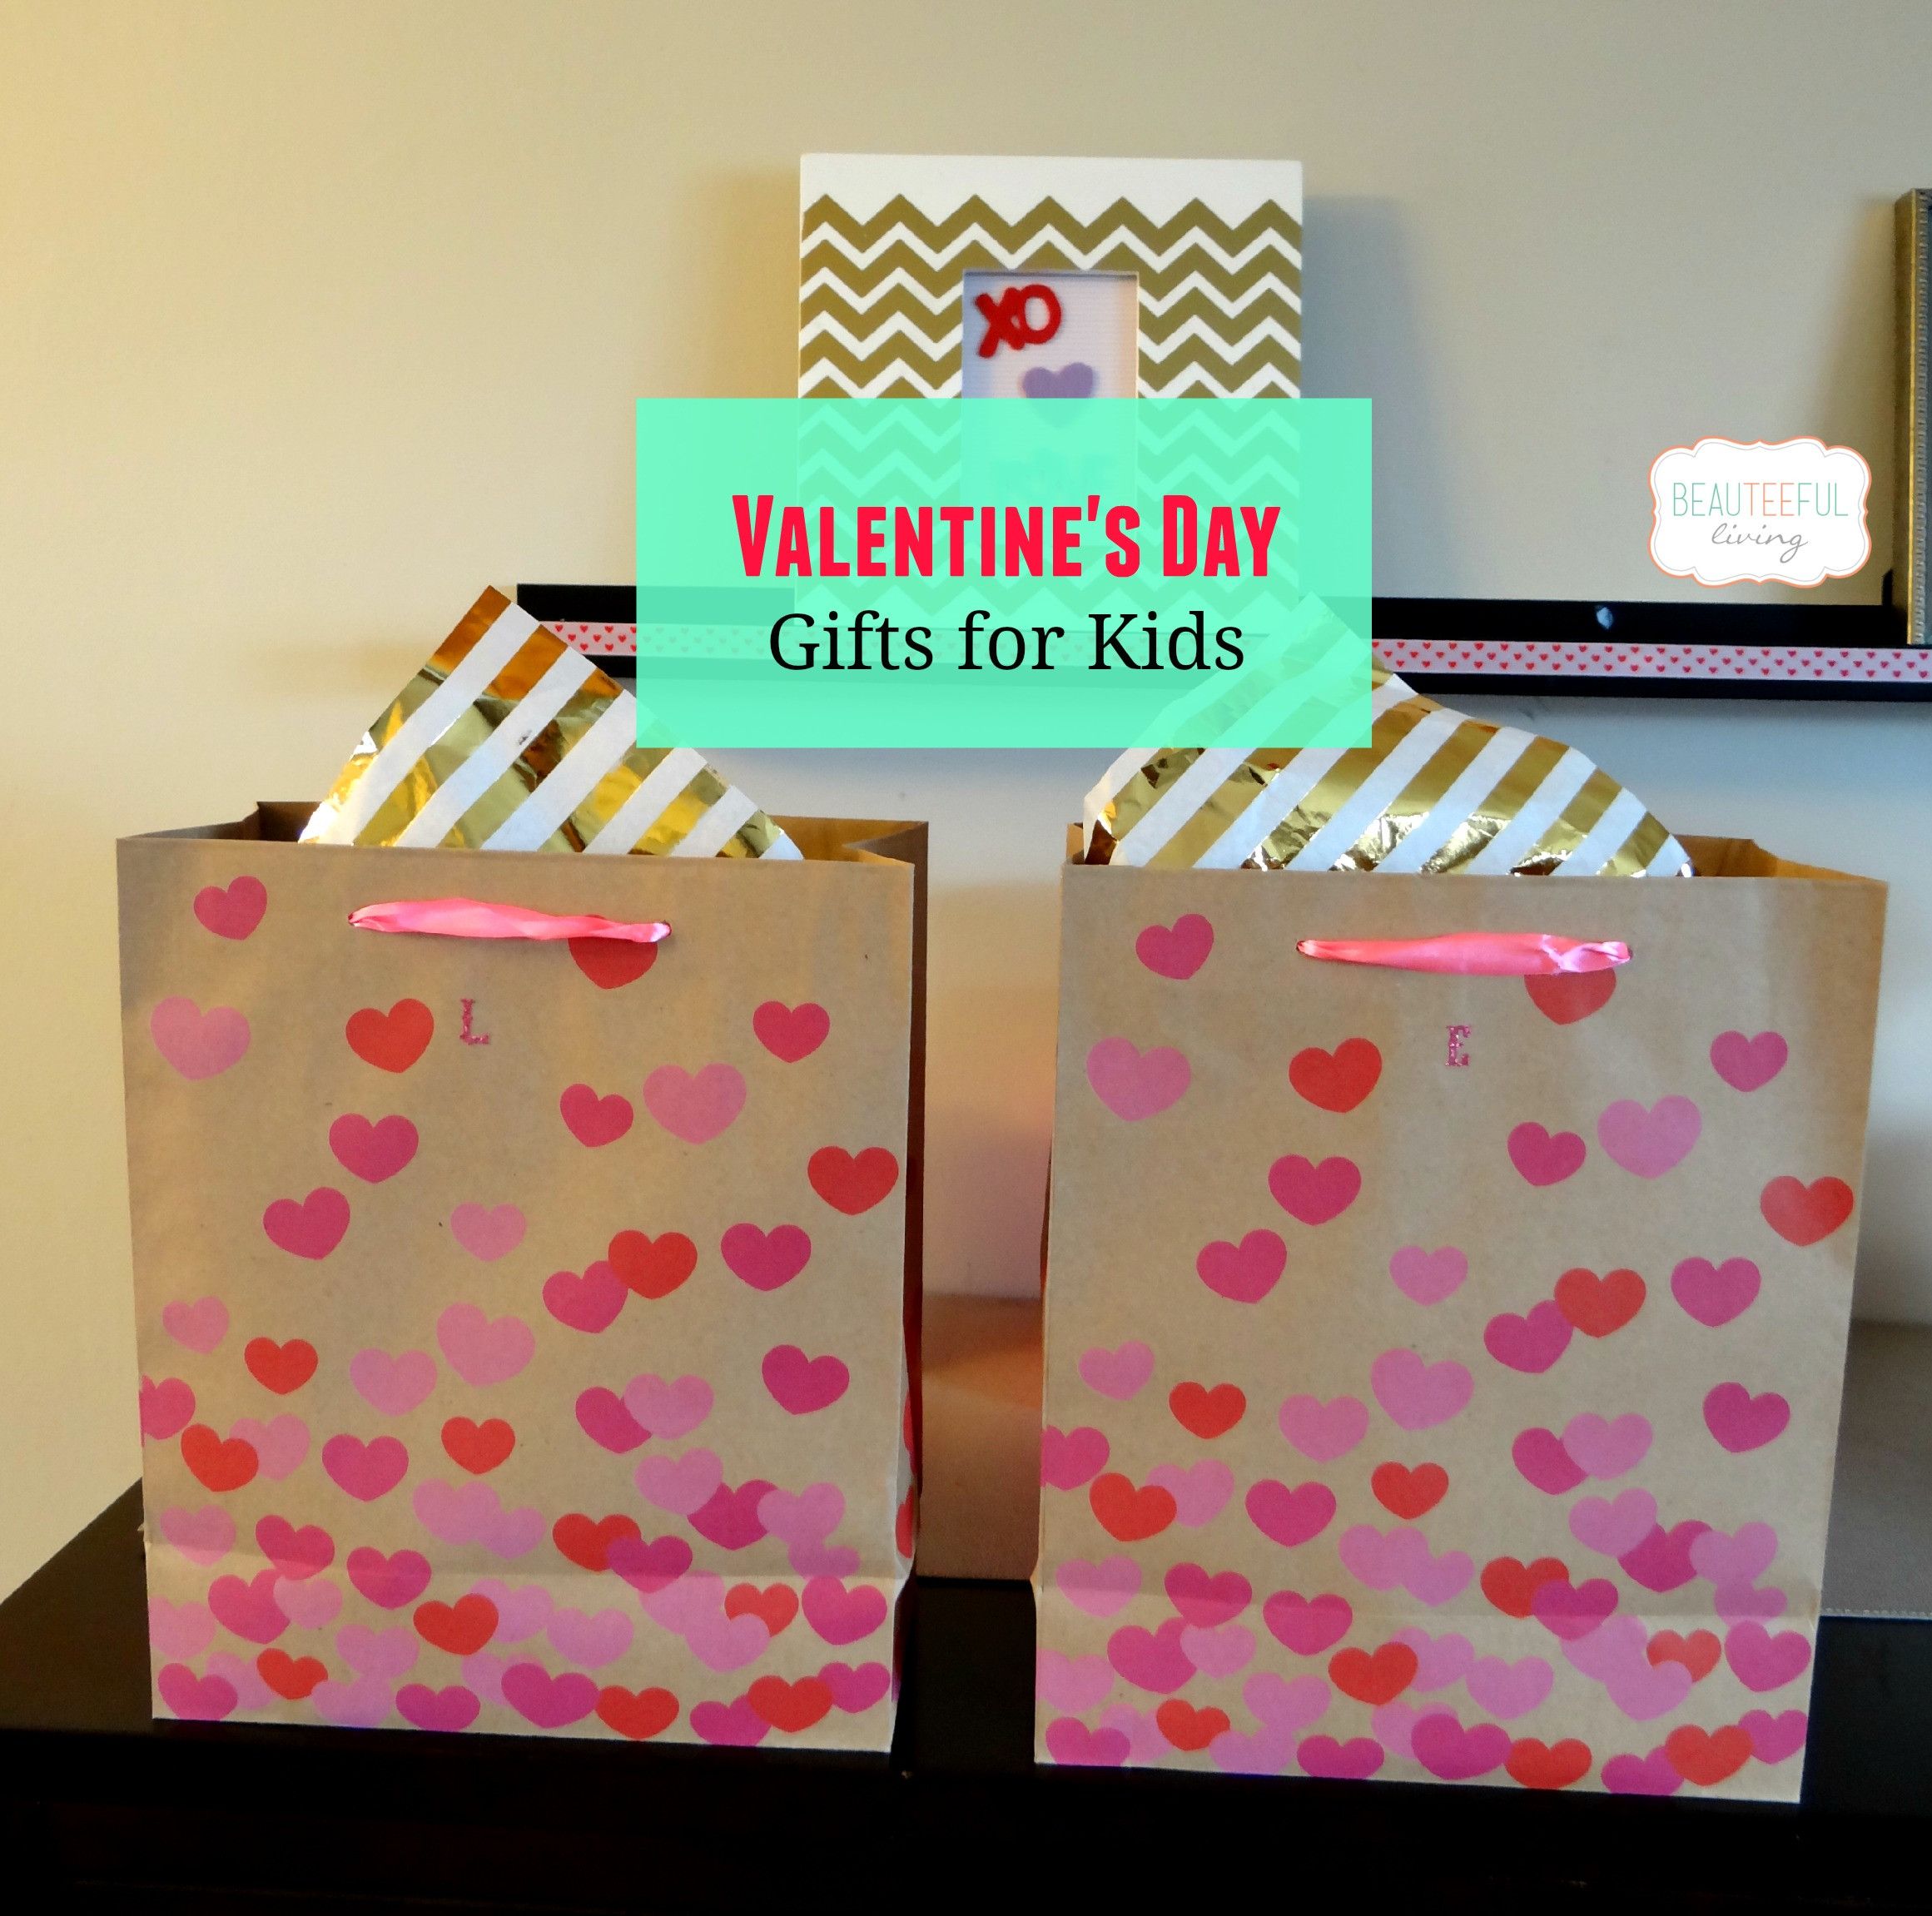 Valentine Gifts Children
 Valentine s Day Gifts for Kids BEAUTEEFUL Living